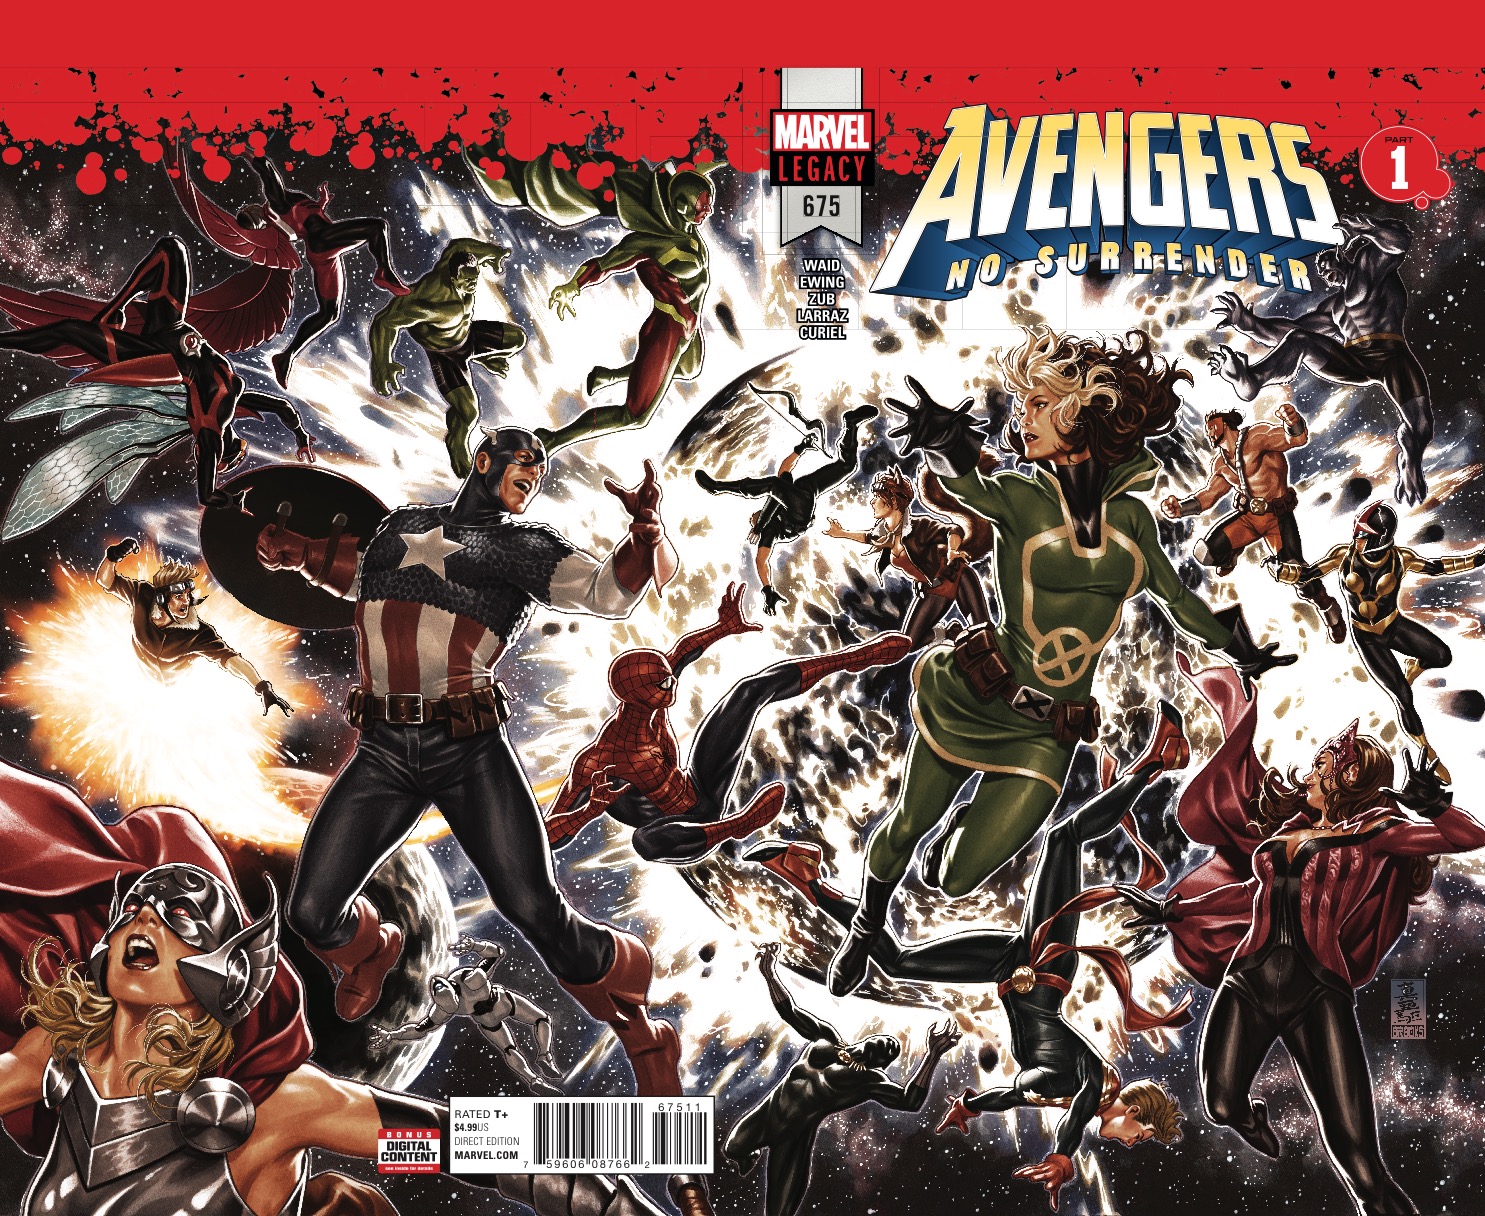 Avengers #675 Review: every Avenger is needed to win this one